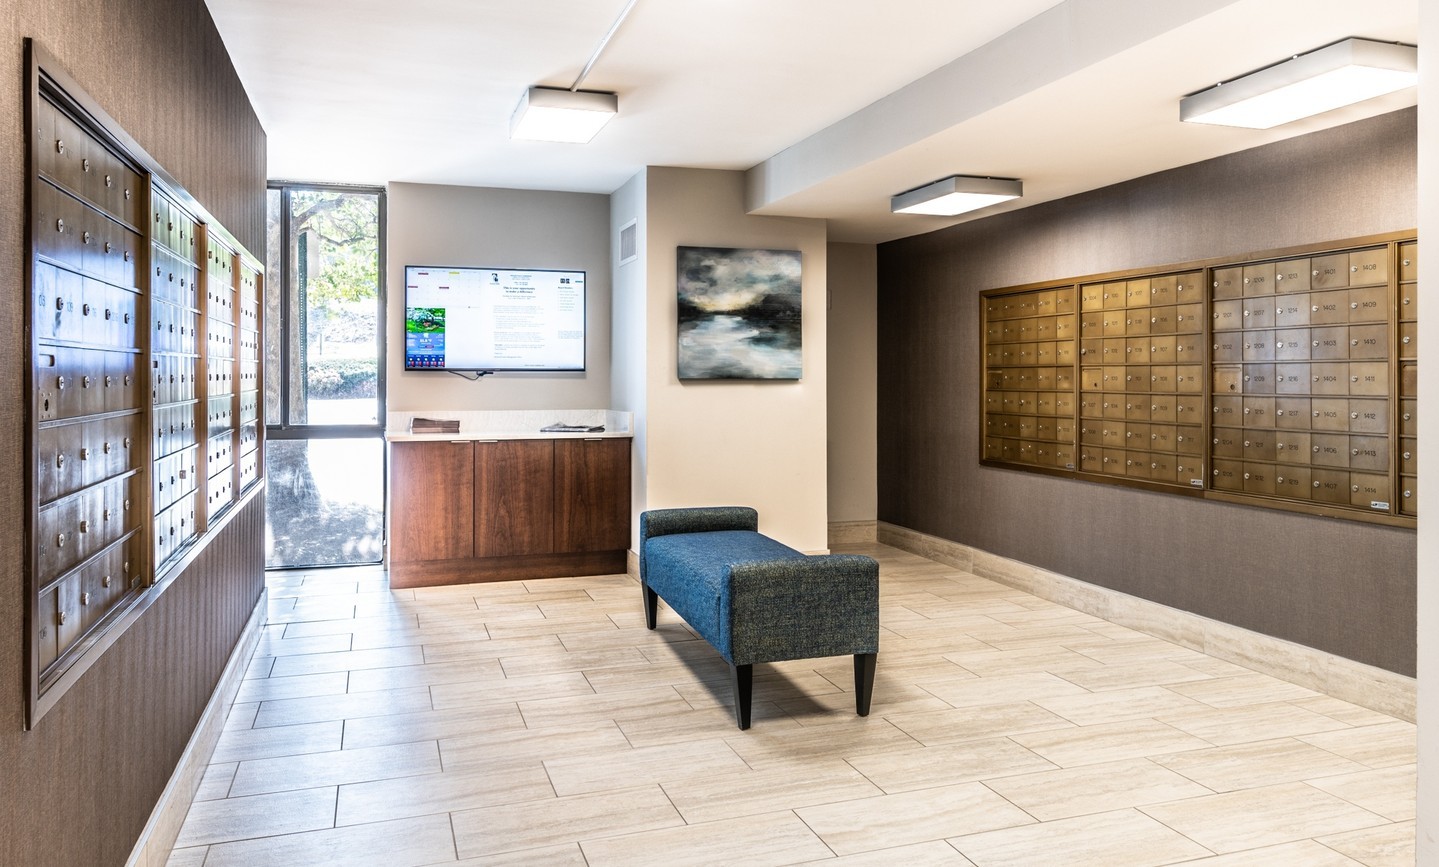 Worried the old antique brass mailboxes in your aging building won't work in a new design? Think again! We were able to blend old and new seamlessly at this renovation project in #FallsChurchVA